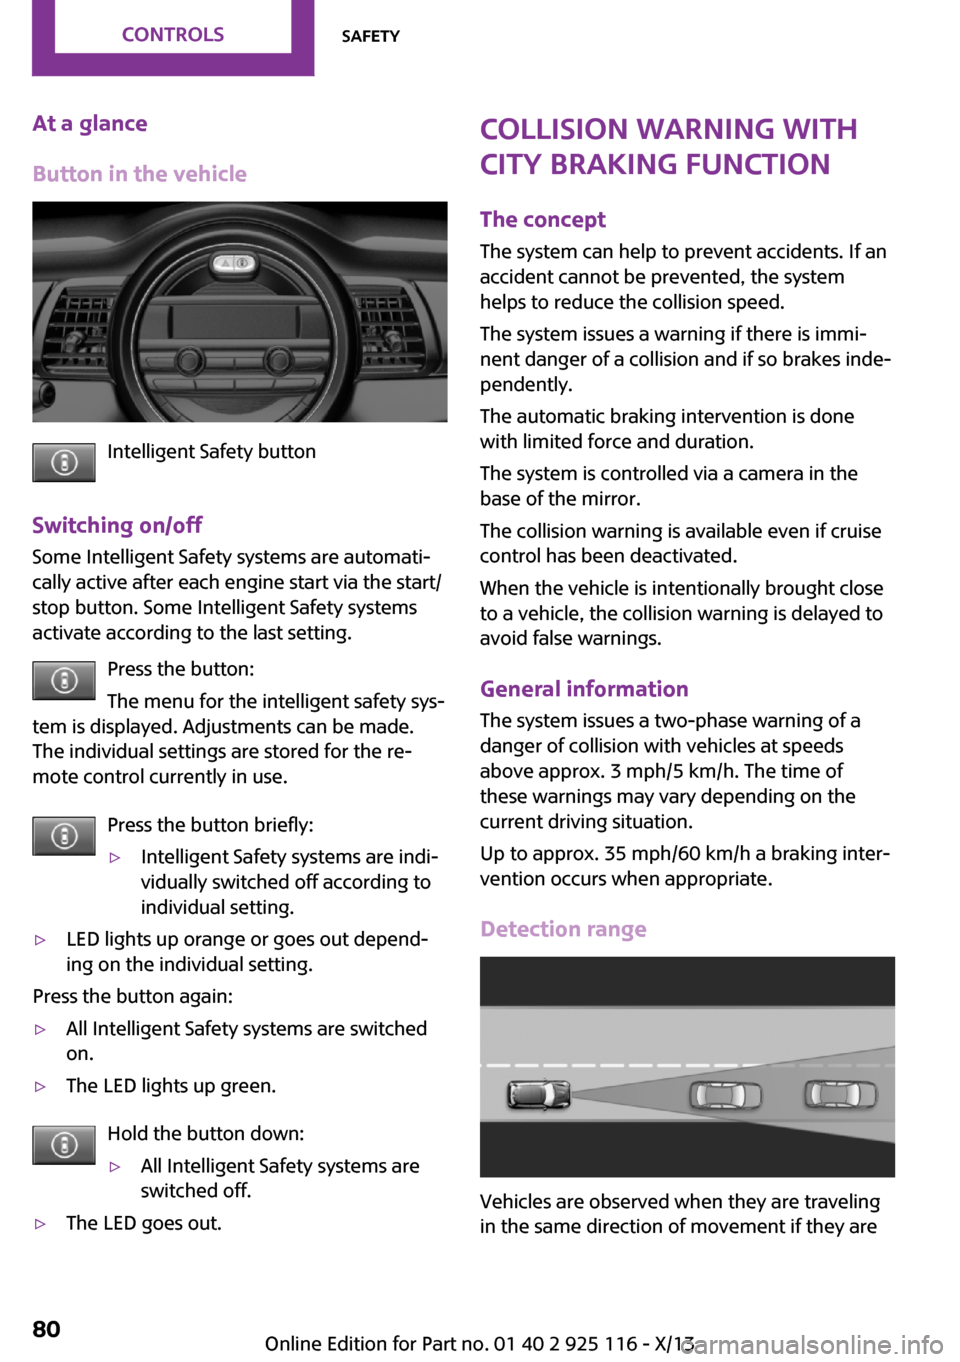 MINI 3 door 2013 Owners Guide At a glance
Button in the vehicle
Intelligent Safety button
Switching on/off Some Intelligent Safety systems are automati‐
cally active after each engine start via the start/
stop button. Some Intel